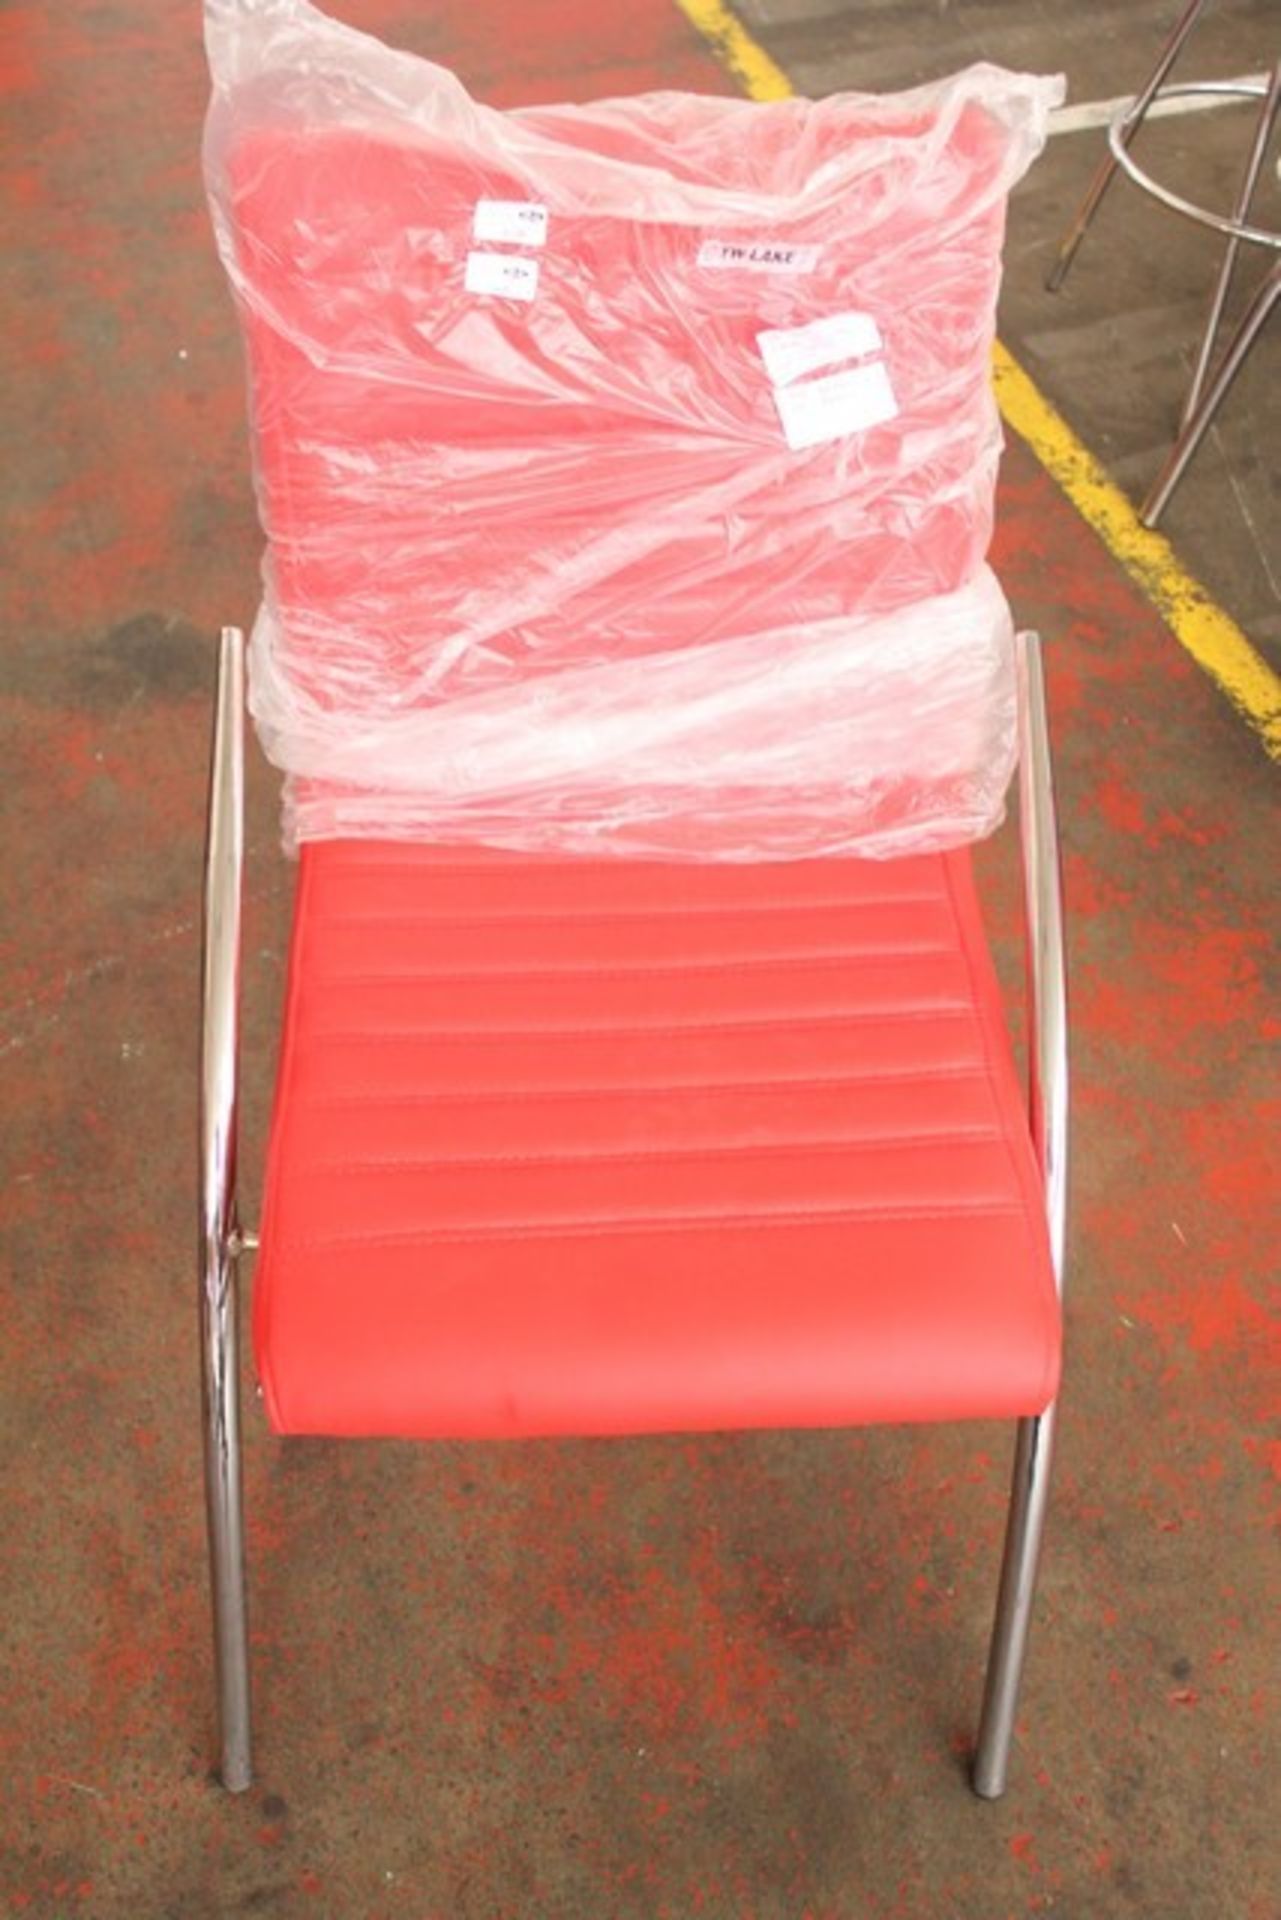 6 x RED LIEBHERR LEATHER AND CHROME DINING CHAIRS IN ONE BOX RRP £85 (658)  *Please note that the